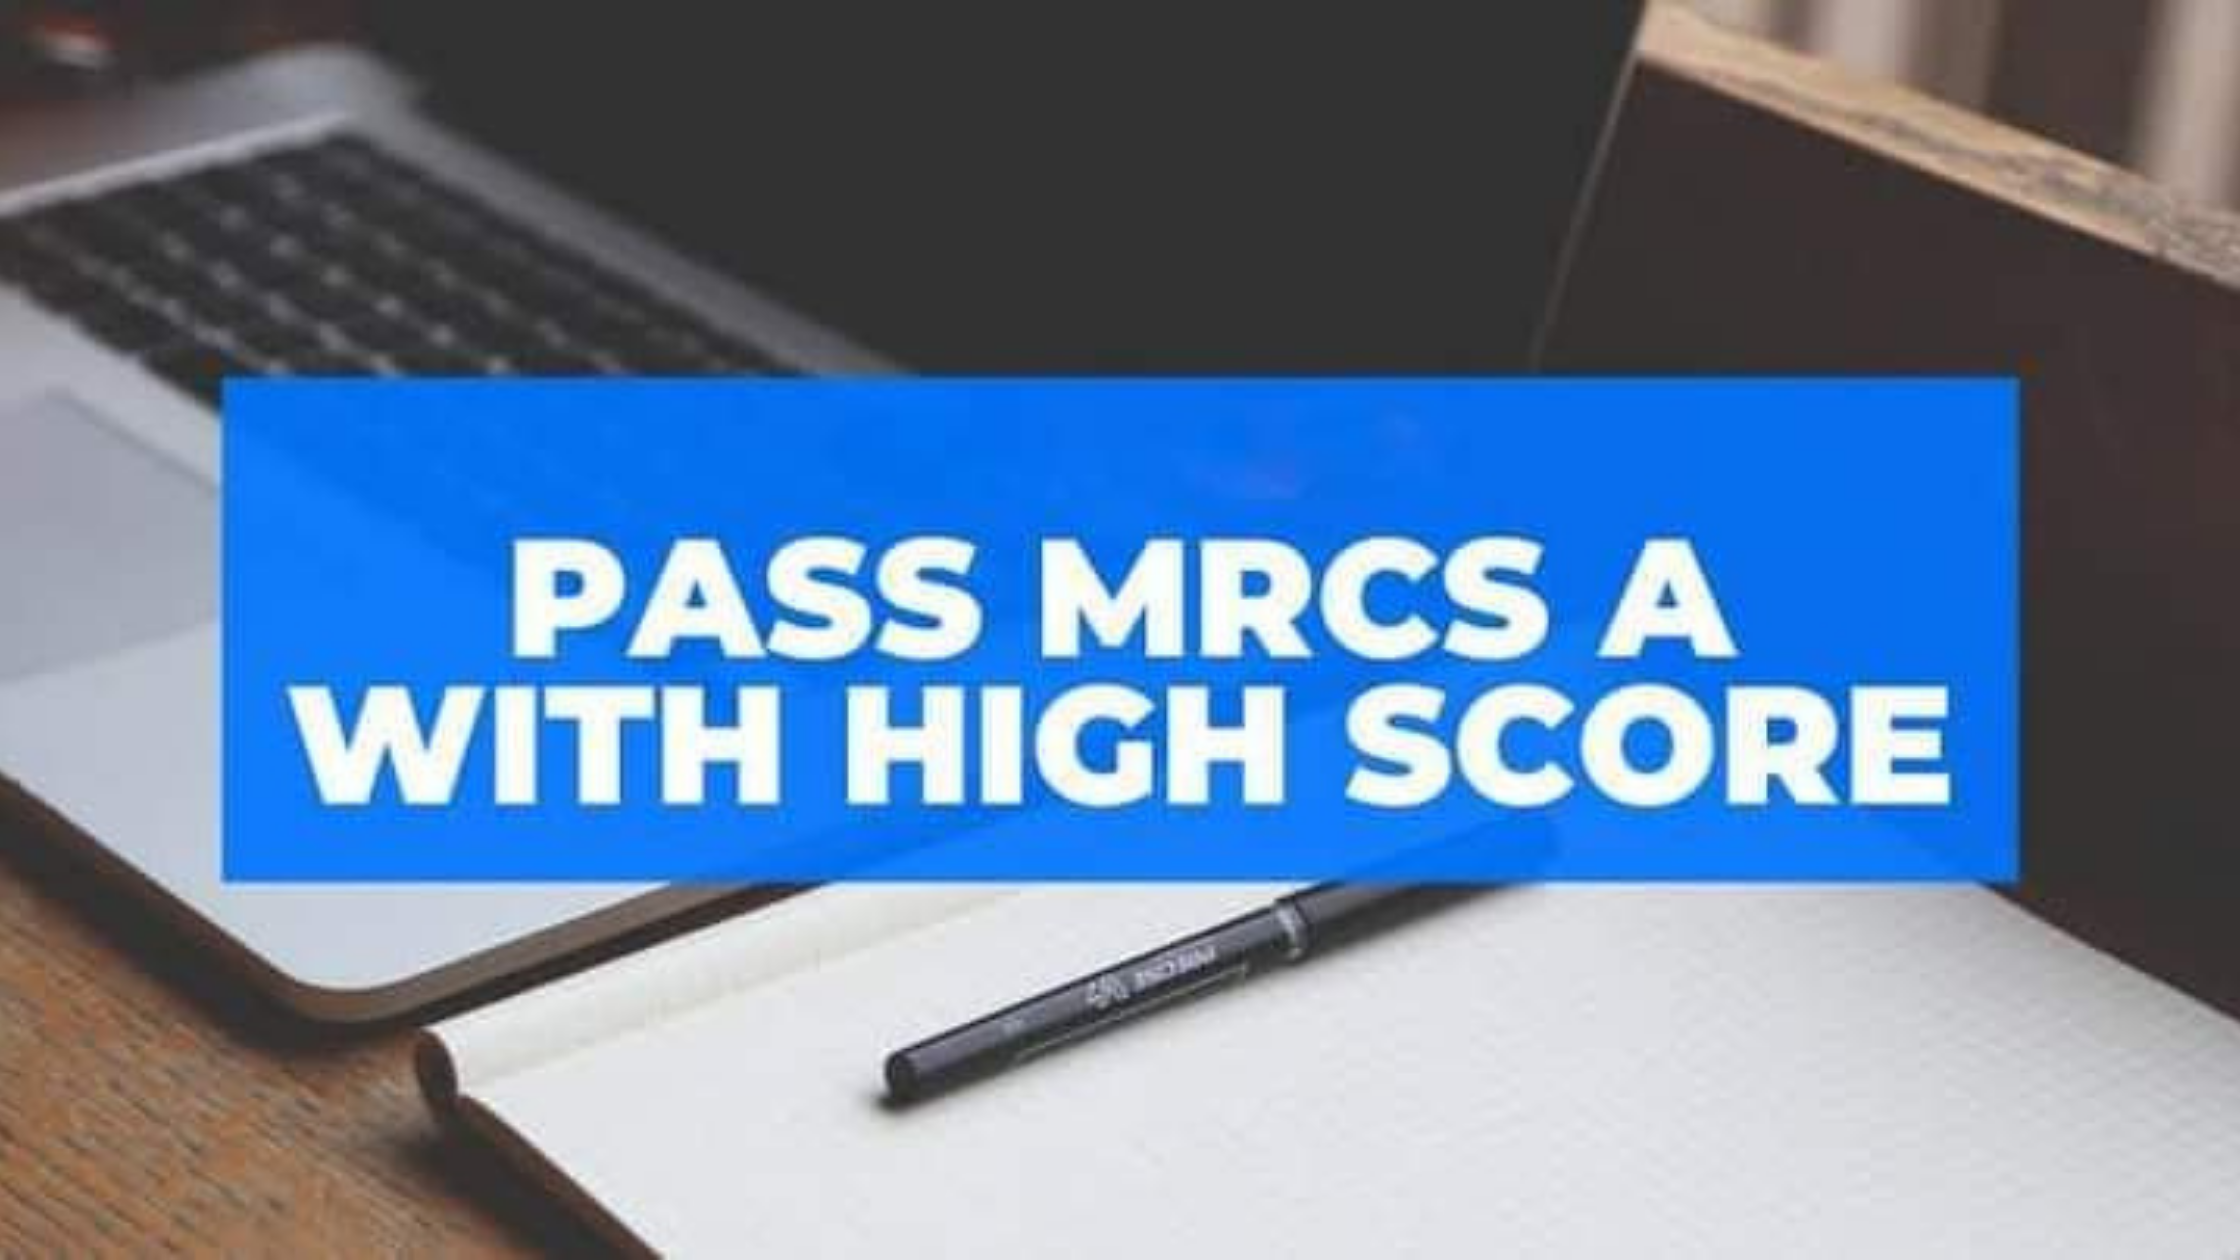 How to Pass MRCS Part A Exam With a High Score Without Courses